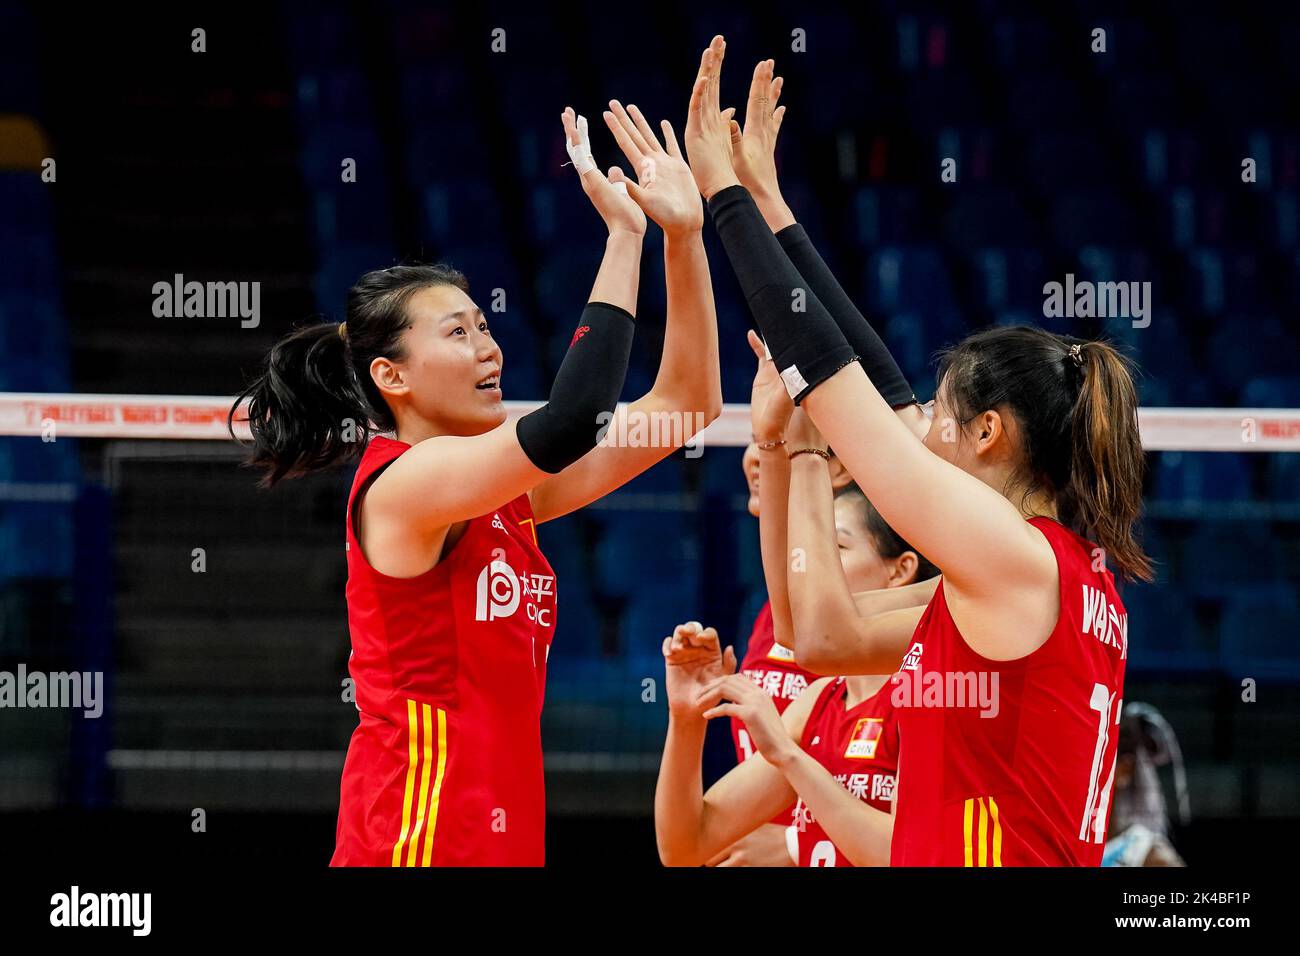 ARNHEM, NETHERLANDS - SEPTEMBER 25: Yizhu Wang of China during the Pool D Phase 1 match between China and Argentina on Day 3 of the FIVB Volleyball Womens World Championship 2022 at the Gelredome on September 25, 2022 in Arnhem, Netherlands (Photo by Rene Nijhuis/Orange Pictures) Stock Photo